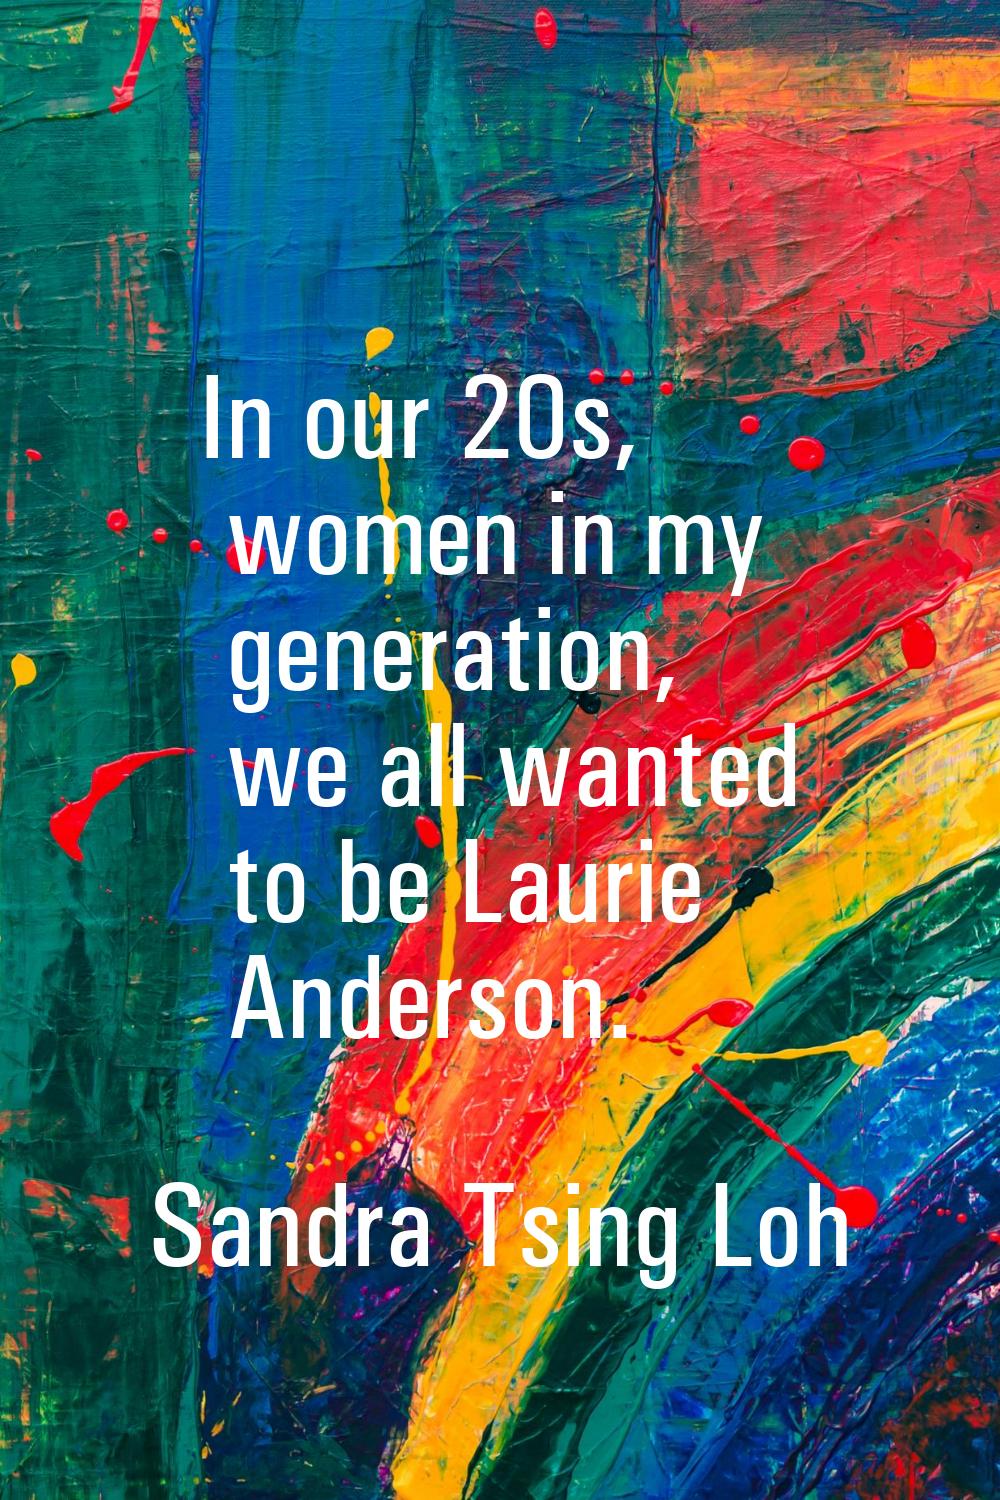 In our 20s, women in my generation, we all wanted to be Laurie Anderson.